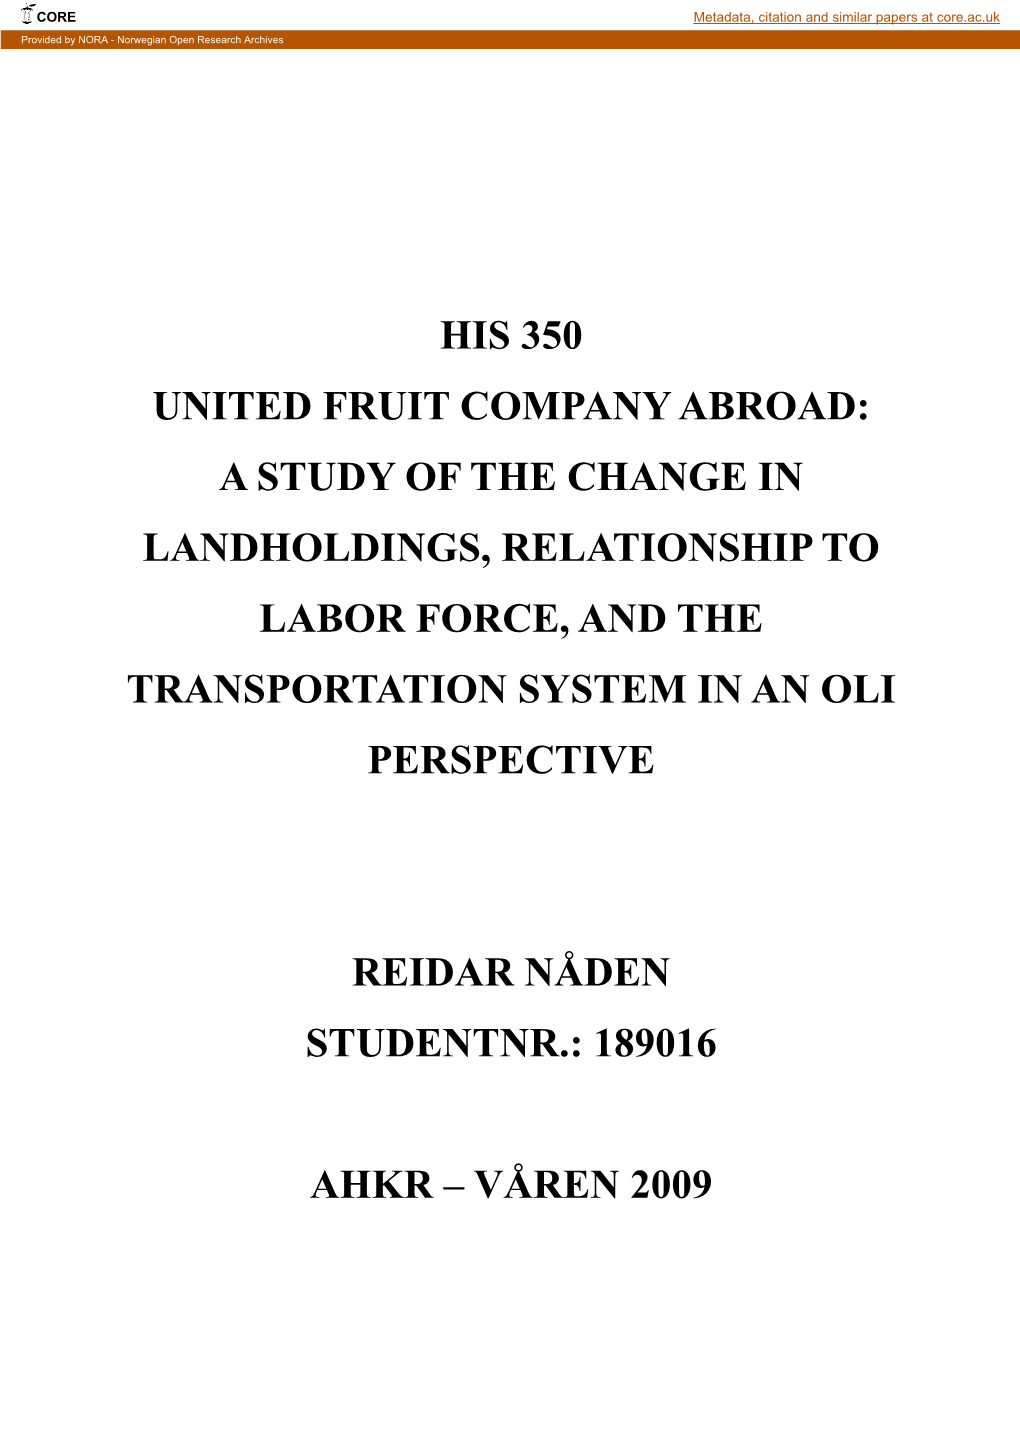 His 350 United Fruit Company Abroad: a Study of the Change in Landholdings, Relationship to Labor Force, and the Transportation System in an Oli Perspective